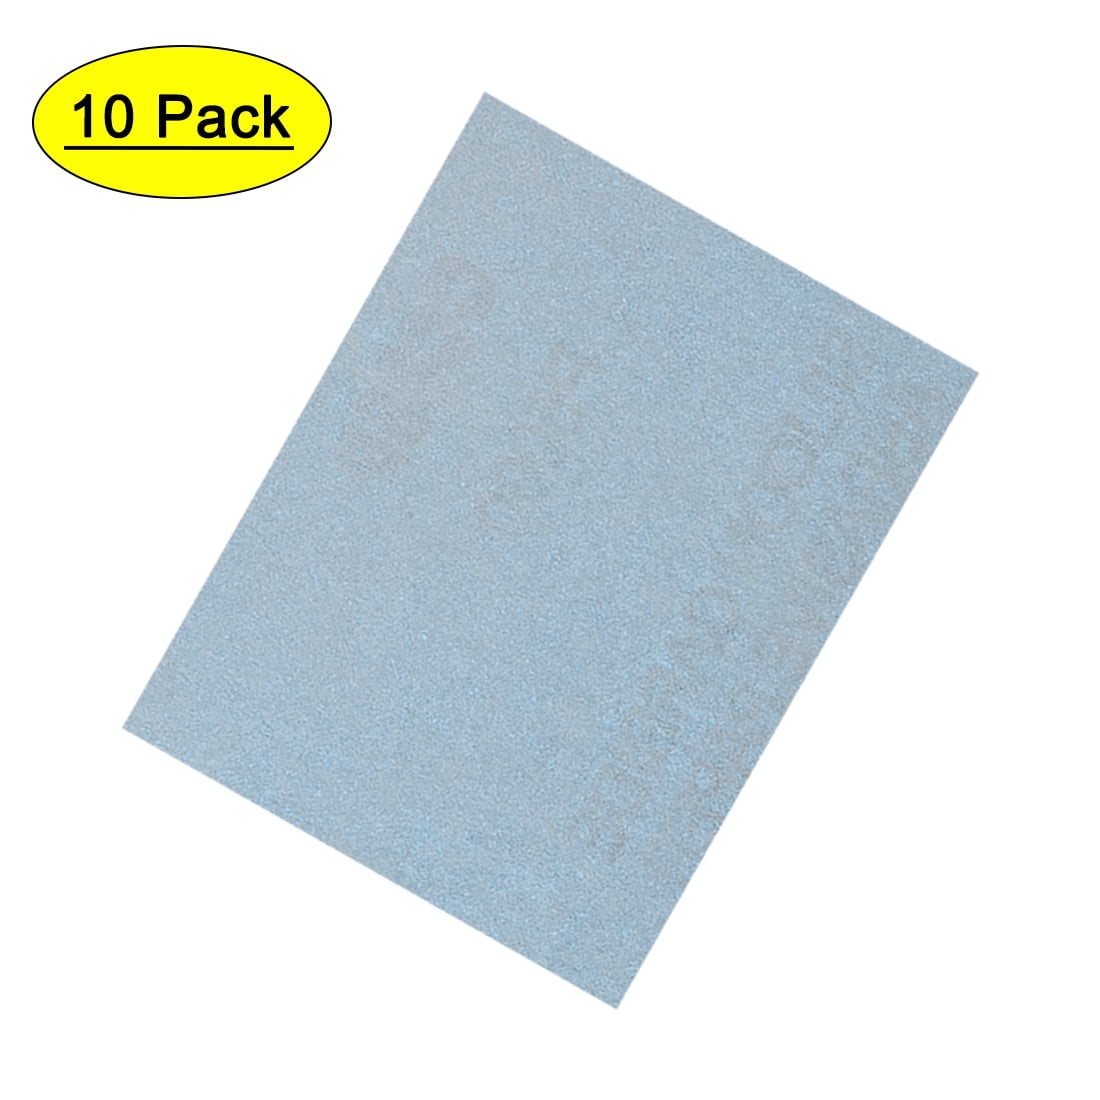 Grit 2000 Waterproof Paper 9x11 Wet/dry Silicon Carbide 5 Sheets 